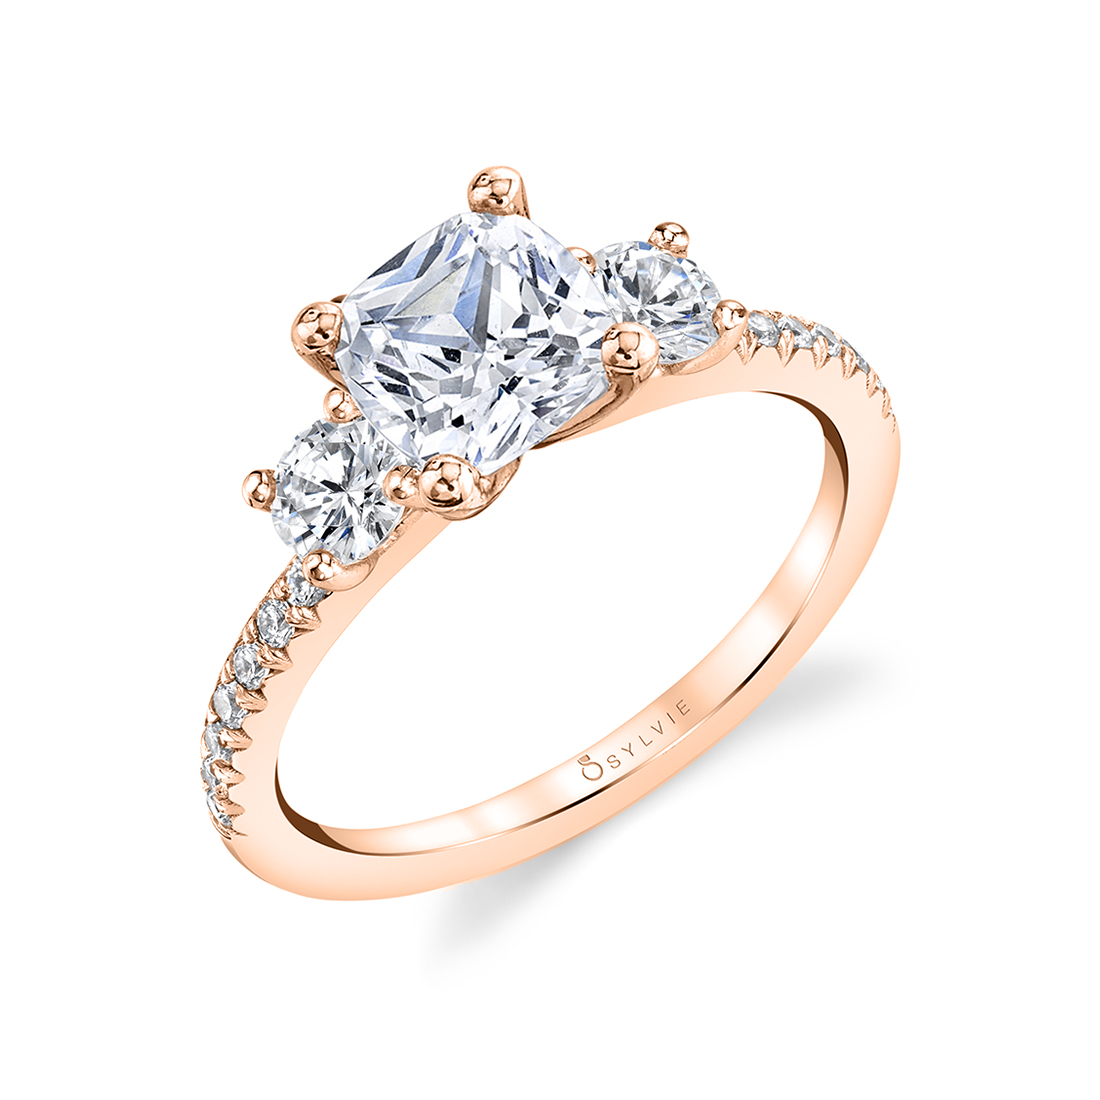 3 stone cushion cut engagement ring in rose gold